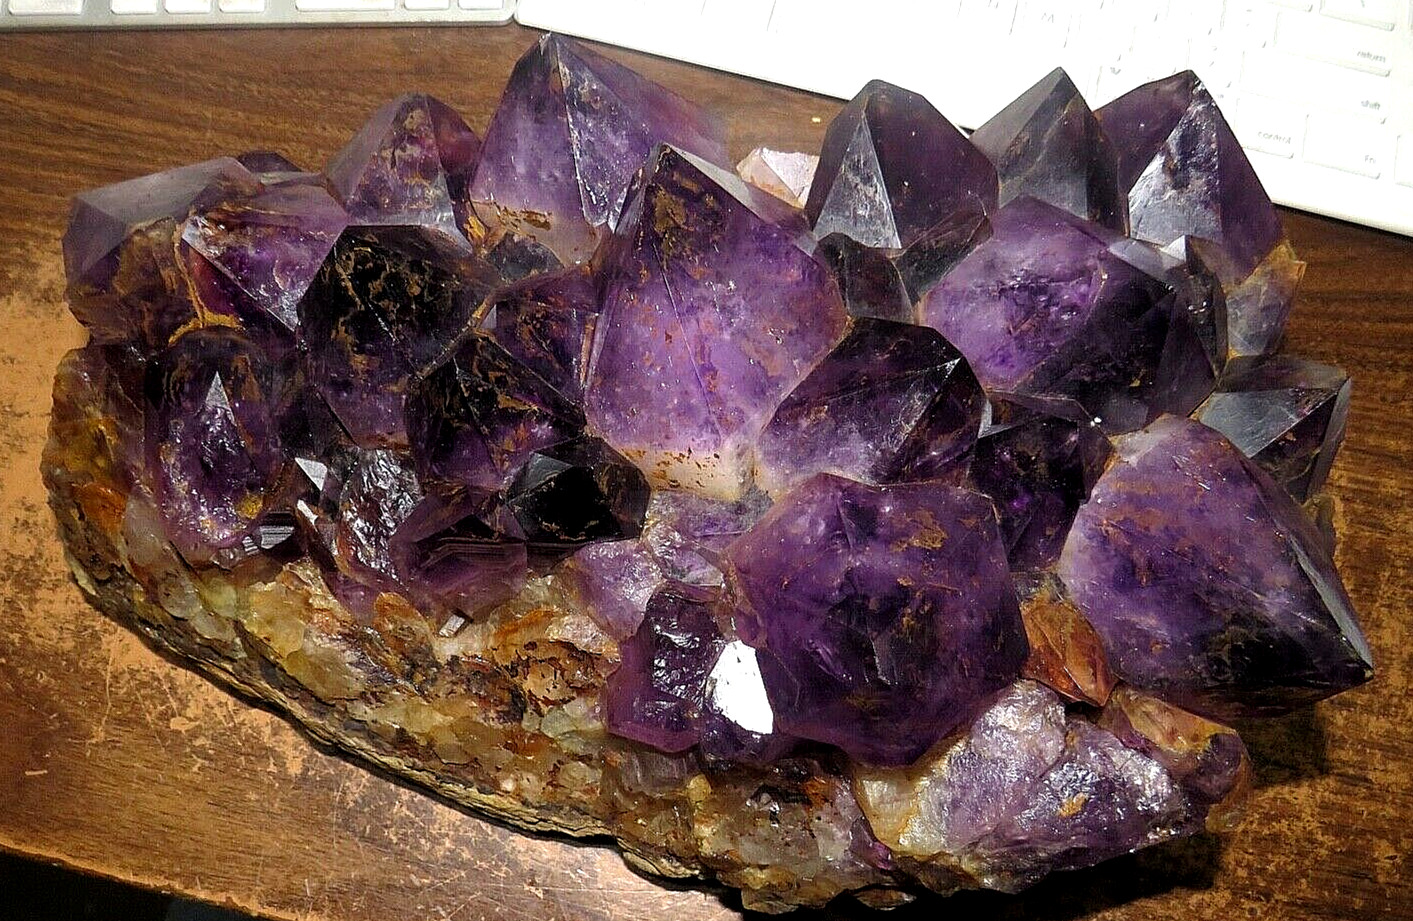 HUGE  AMETHYST CRYSTAL CLUSTER  CATHEDRAL GEODE FROM URUGUAY; 2 -3 INCH CRYSTALS